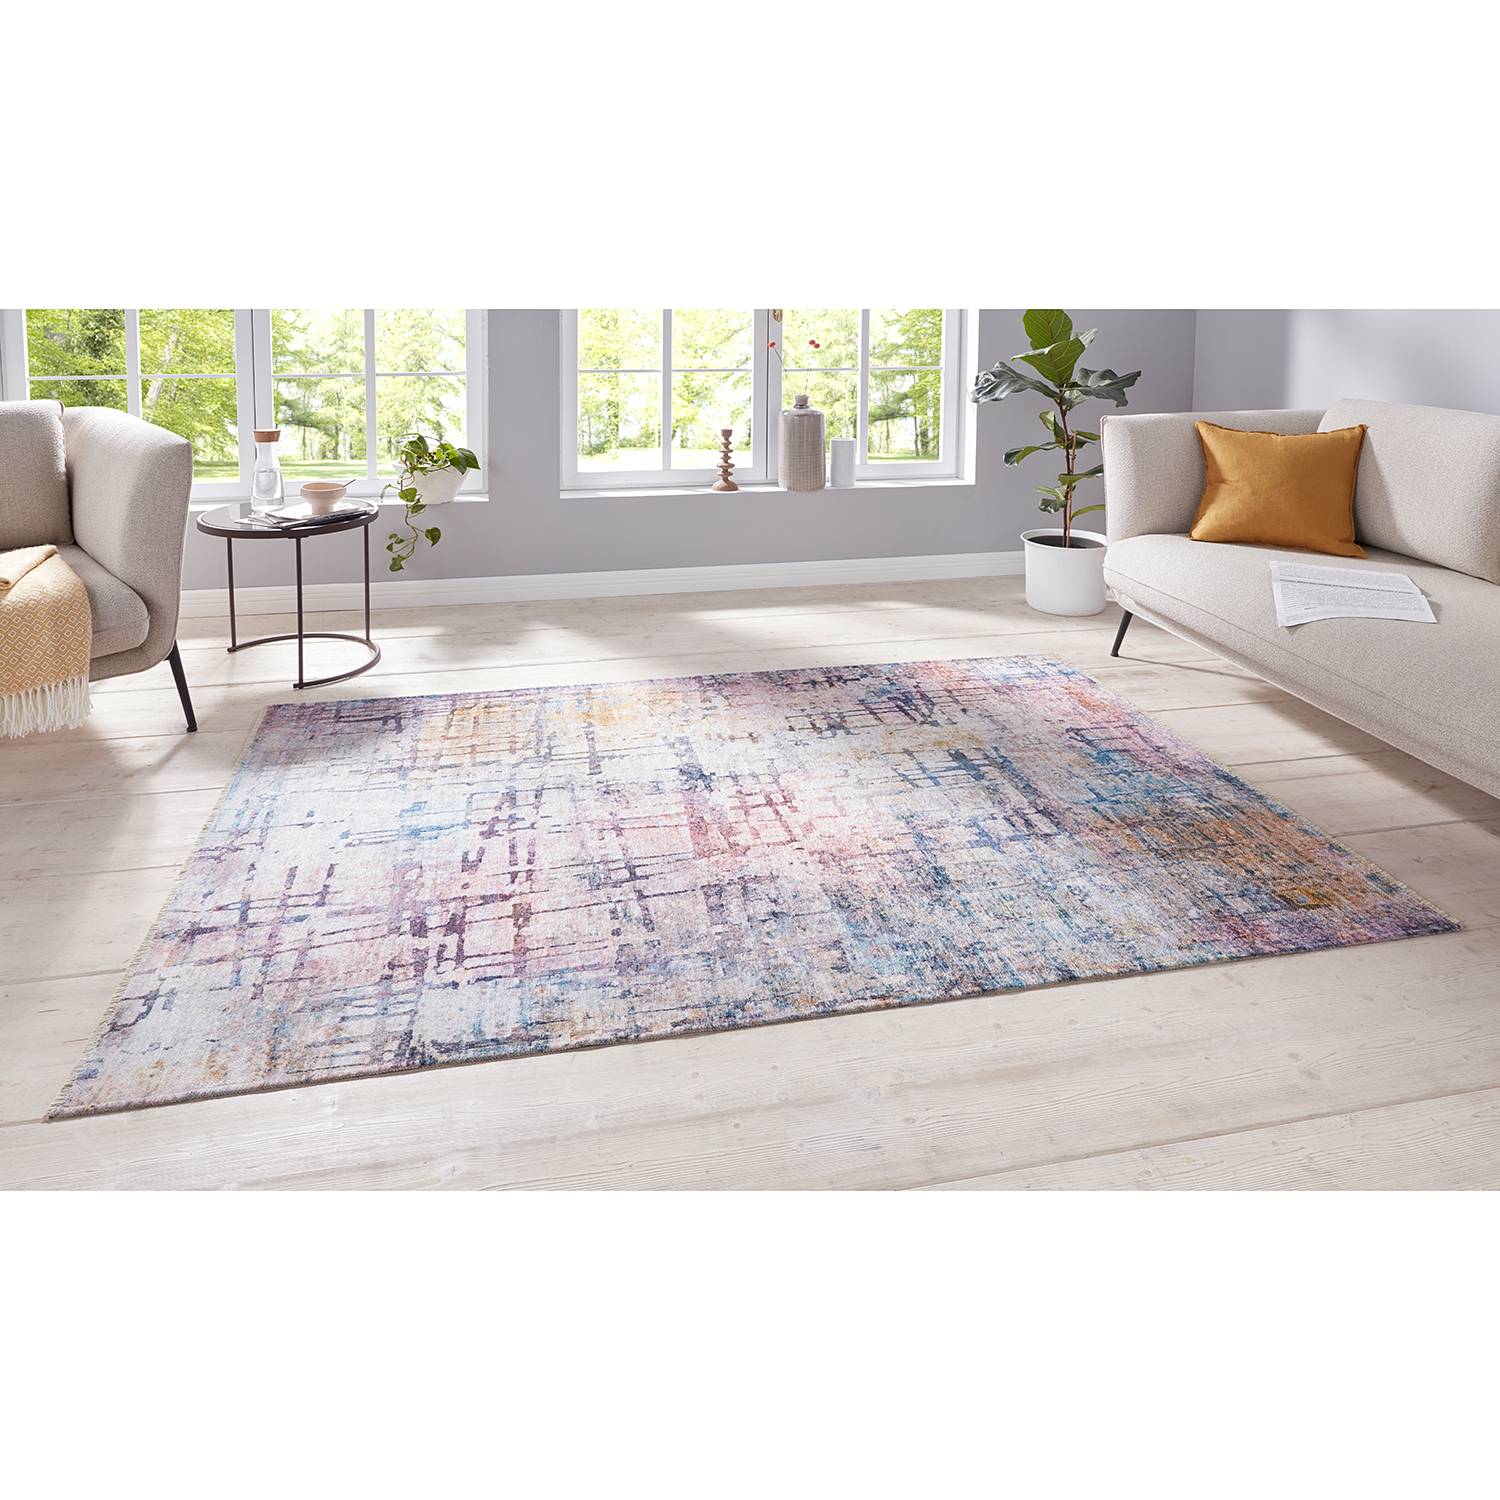 Image of Tapis Contemporary Pastel 000000001000243640